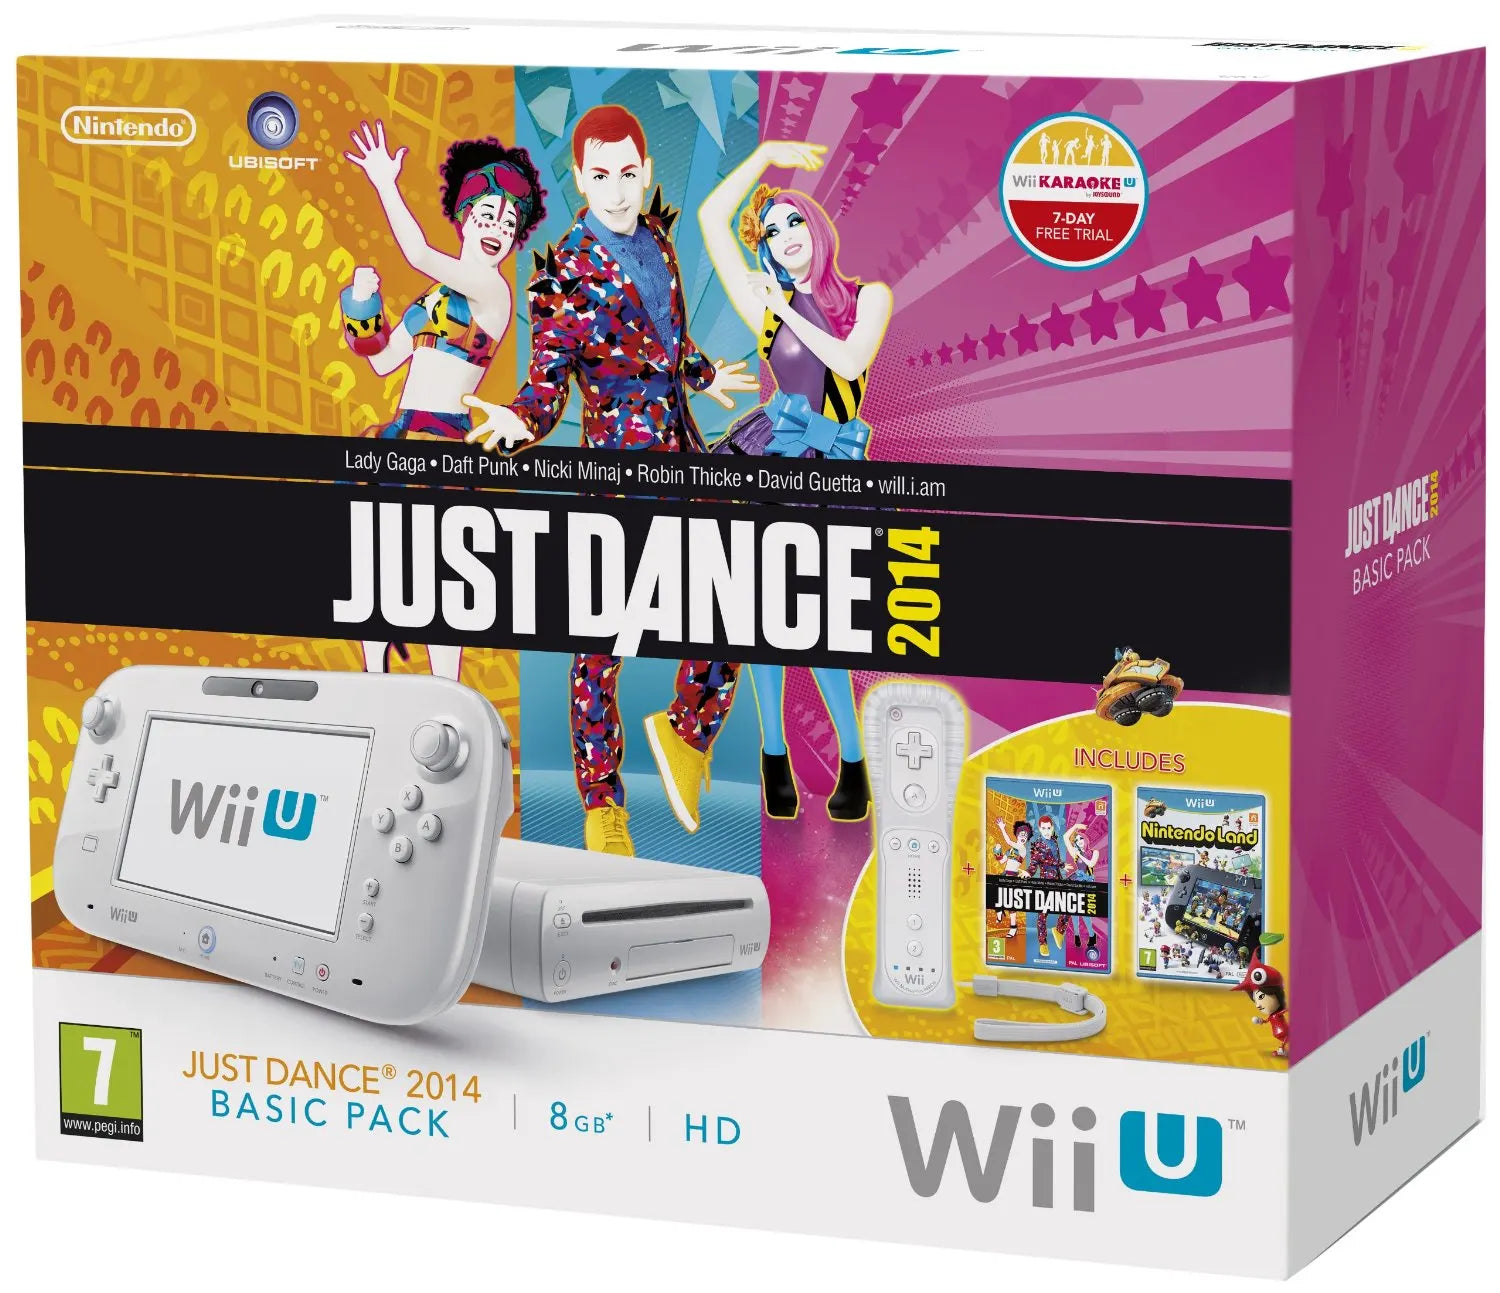 Wii U Console Basic Pack Boxed with Just Dance 2014 and Nintendoland | Yard's Games Ltd